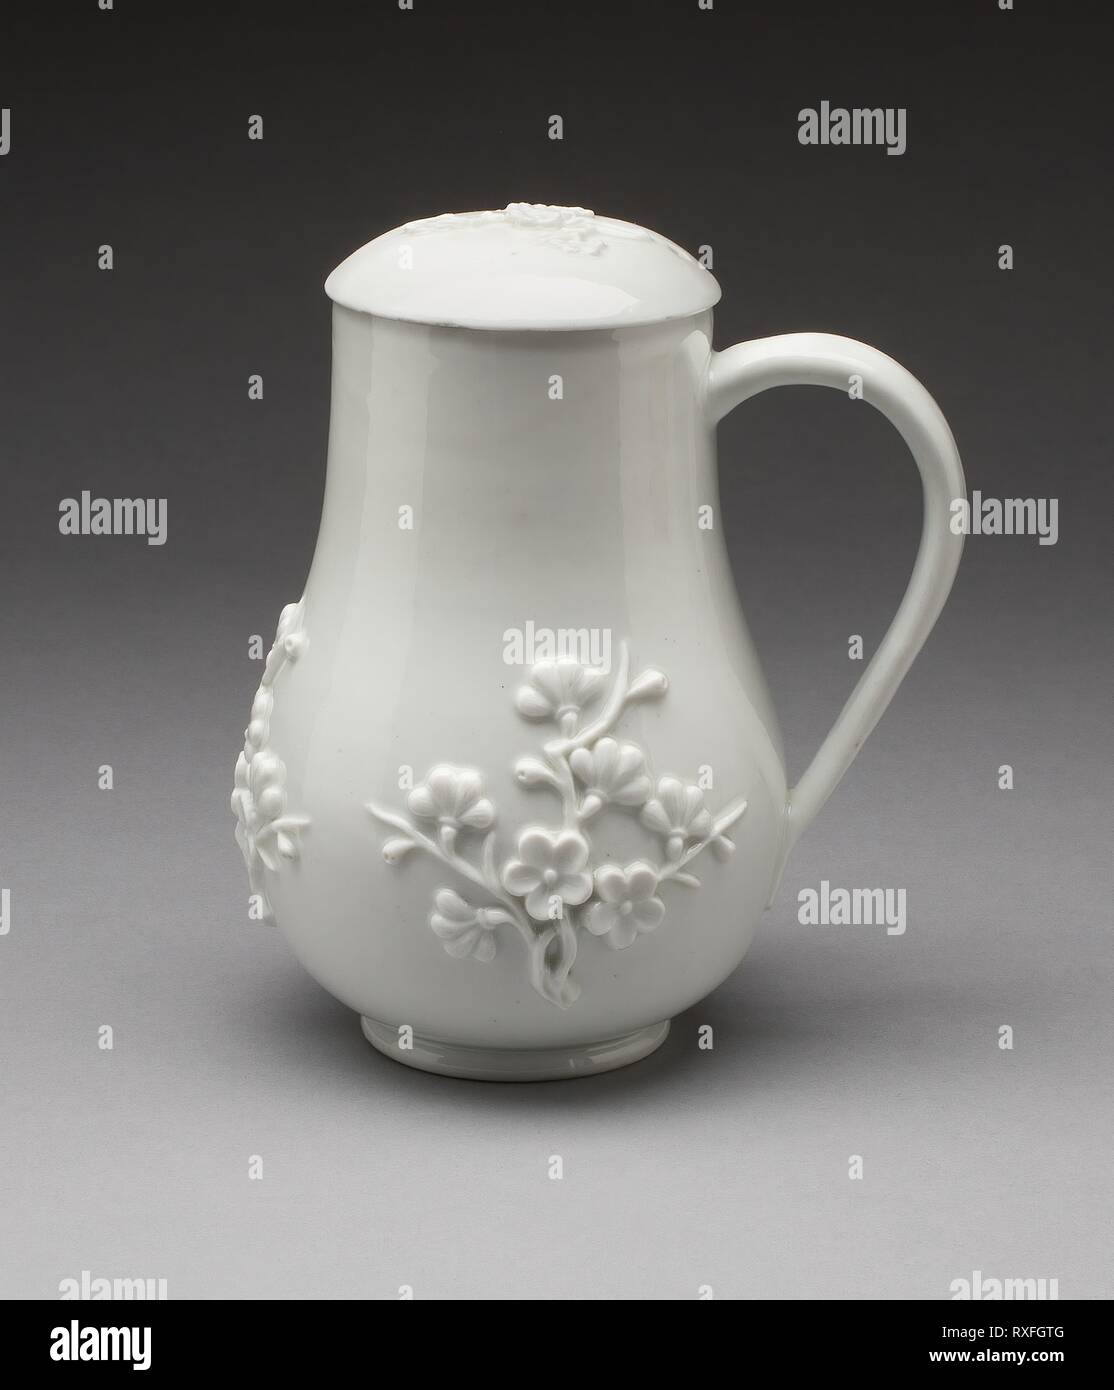 Milk Jug with Cover. Meissen Porcelain Manufactory; German, founded 1710. Date: 1730-1740. Dimensions: 17.8 x 14.6 cm (7 x 5 3/4 in.). Hard-paste porcelain. Origin: Meissen. Museum: The Chicago Art Institute. Stock Photo